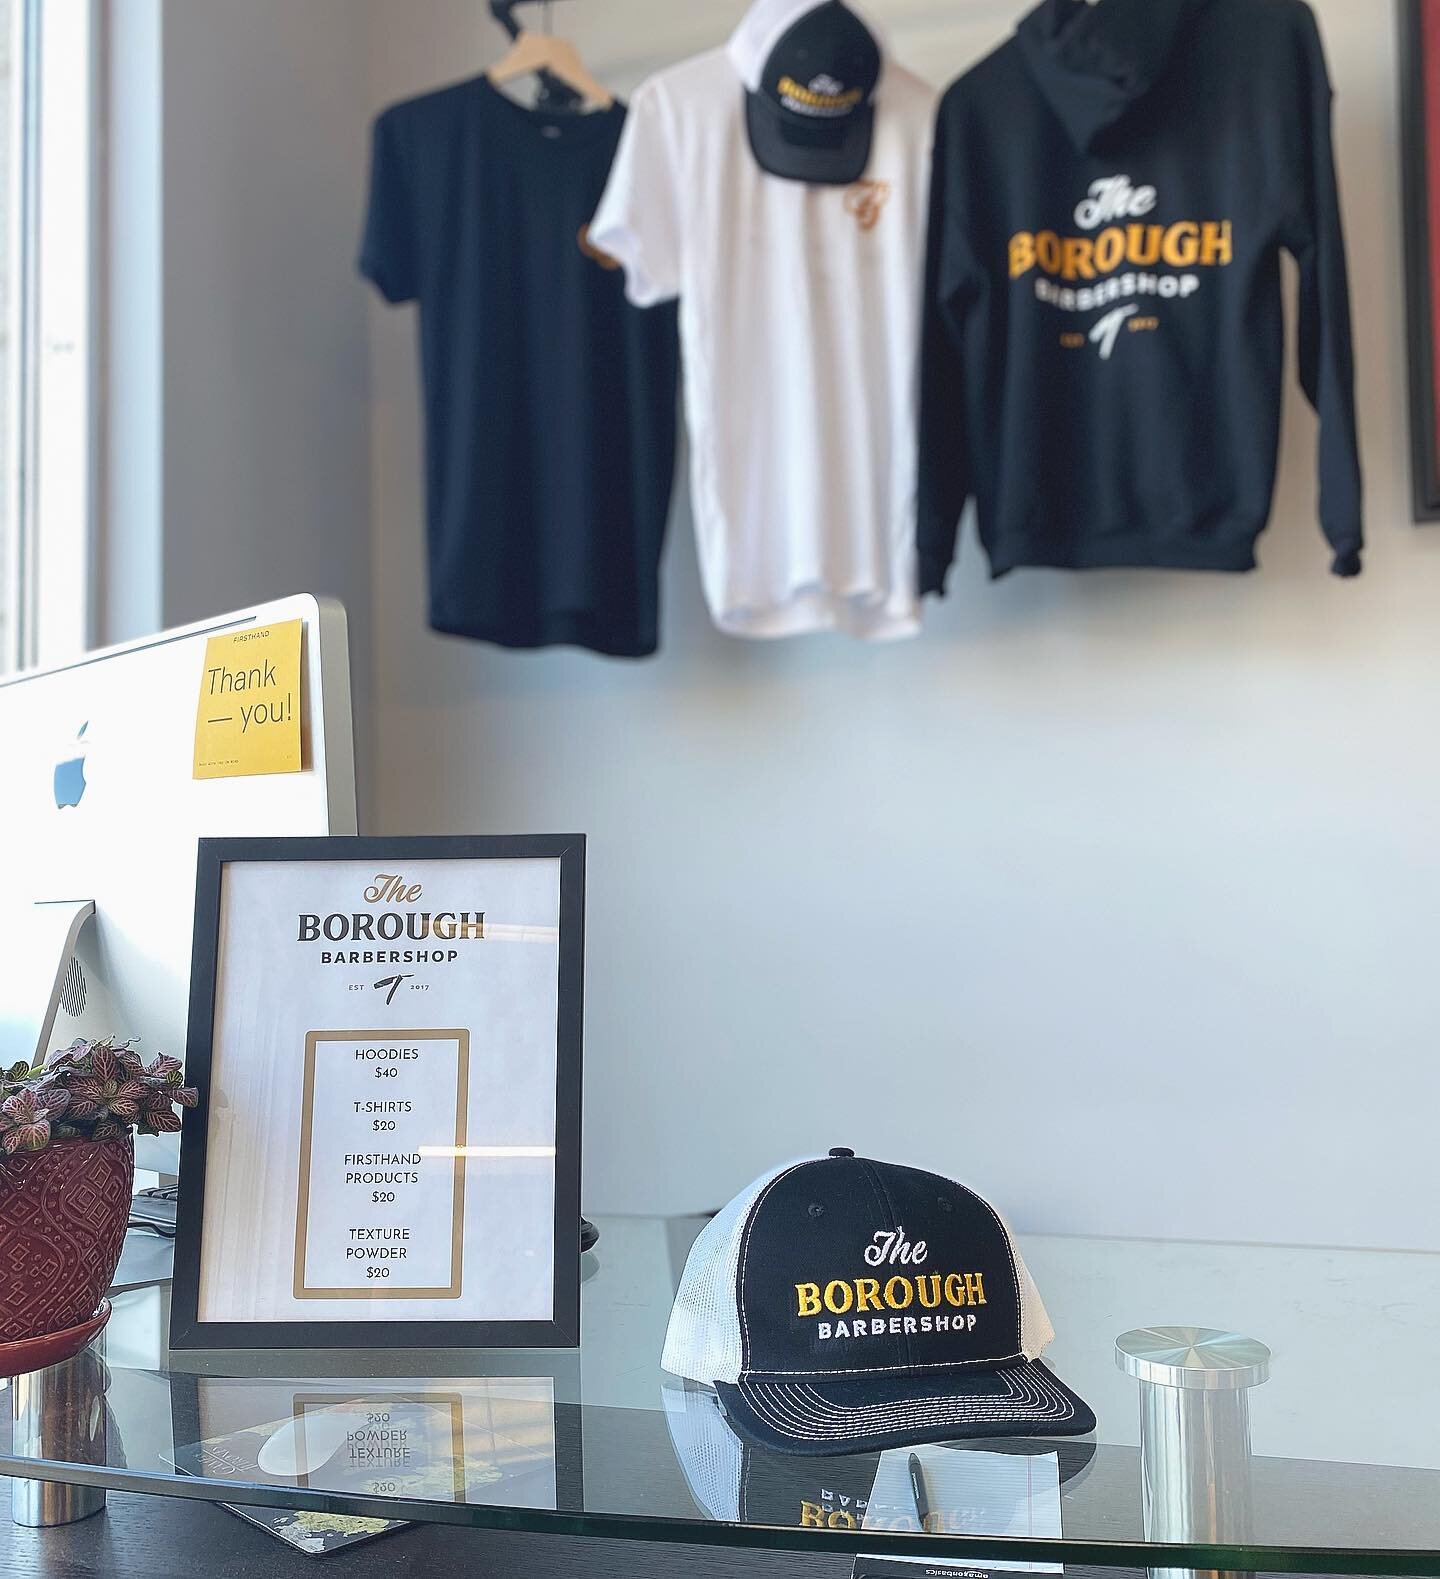 Exciting news, we now have merch available! Shirts, hoodies and hats. Stop in to get yours or pick one up during your next cut.💈 Big thank you to @stateofminddesign